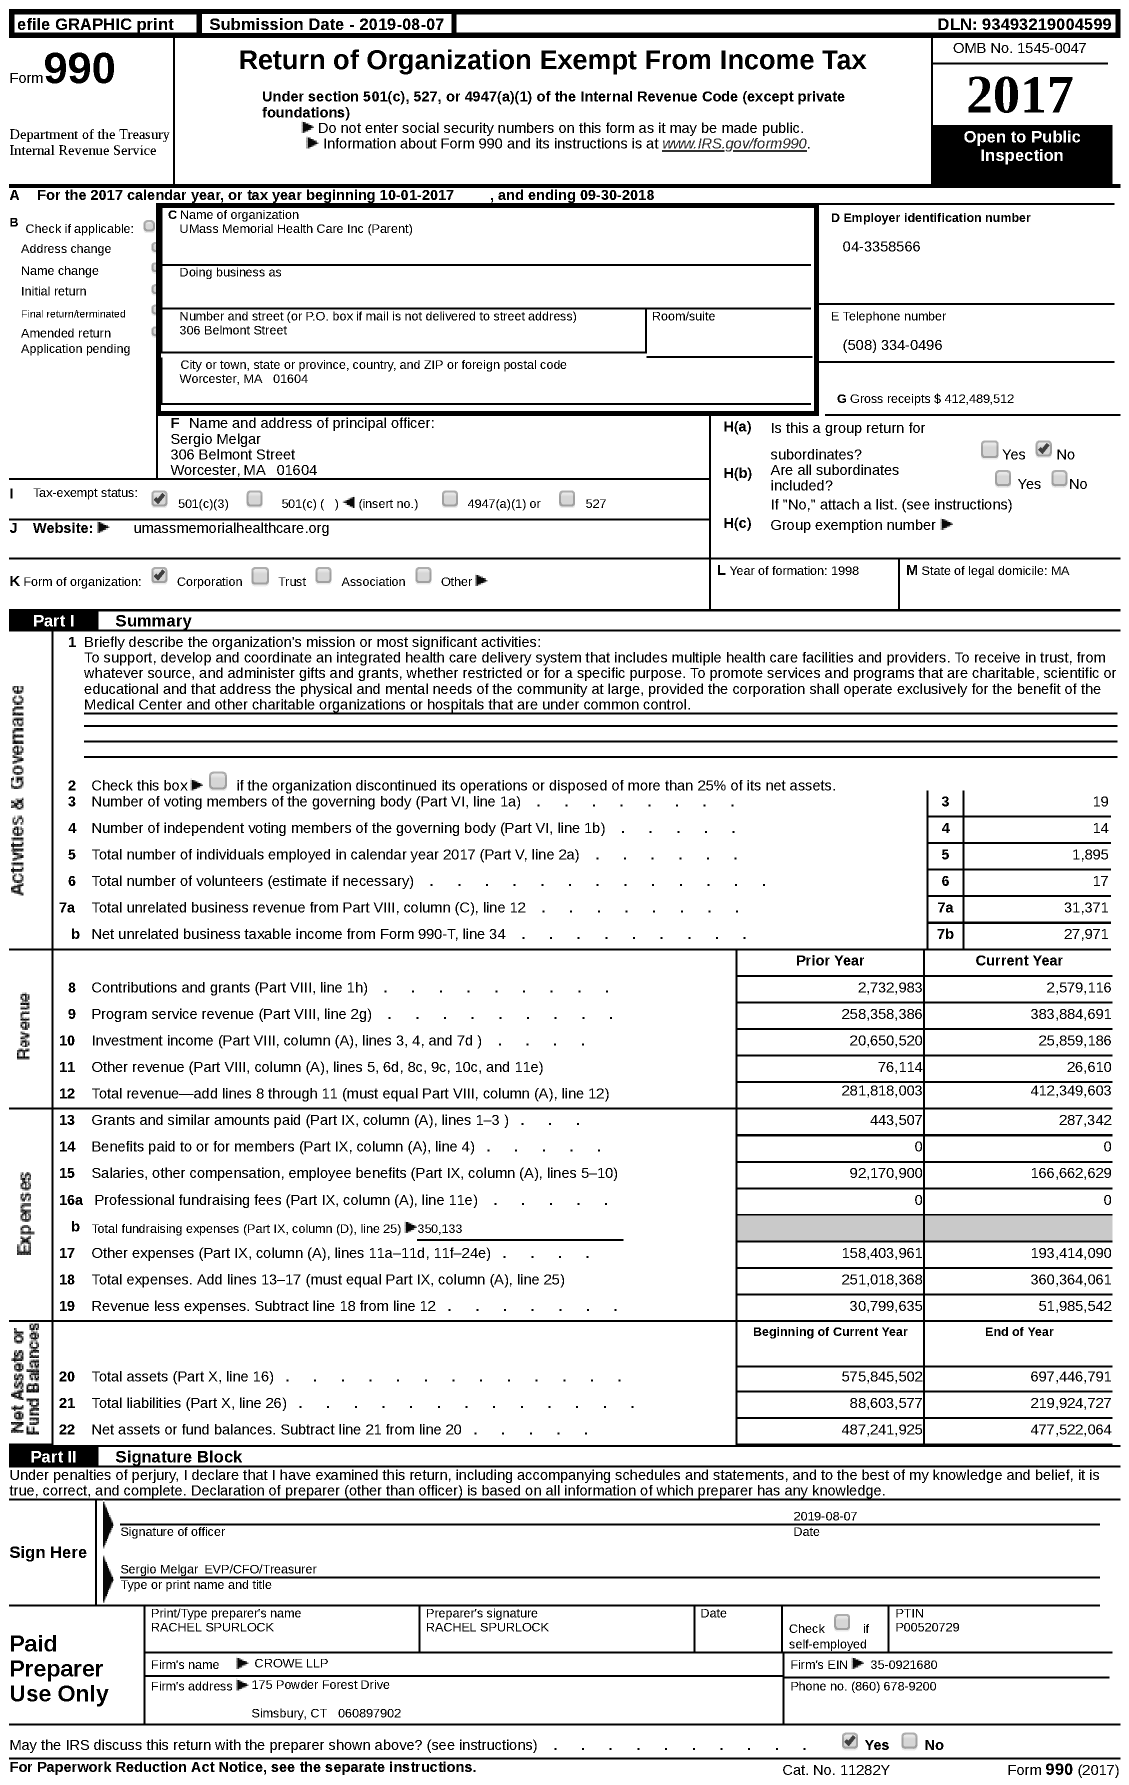 Image of first page of 2017 Form 990 for UMass Memorial Health Care (UMMHC)